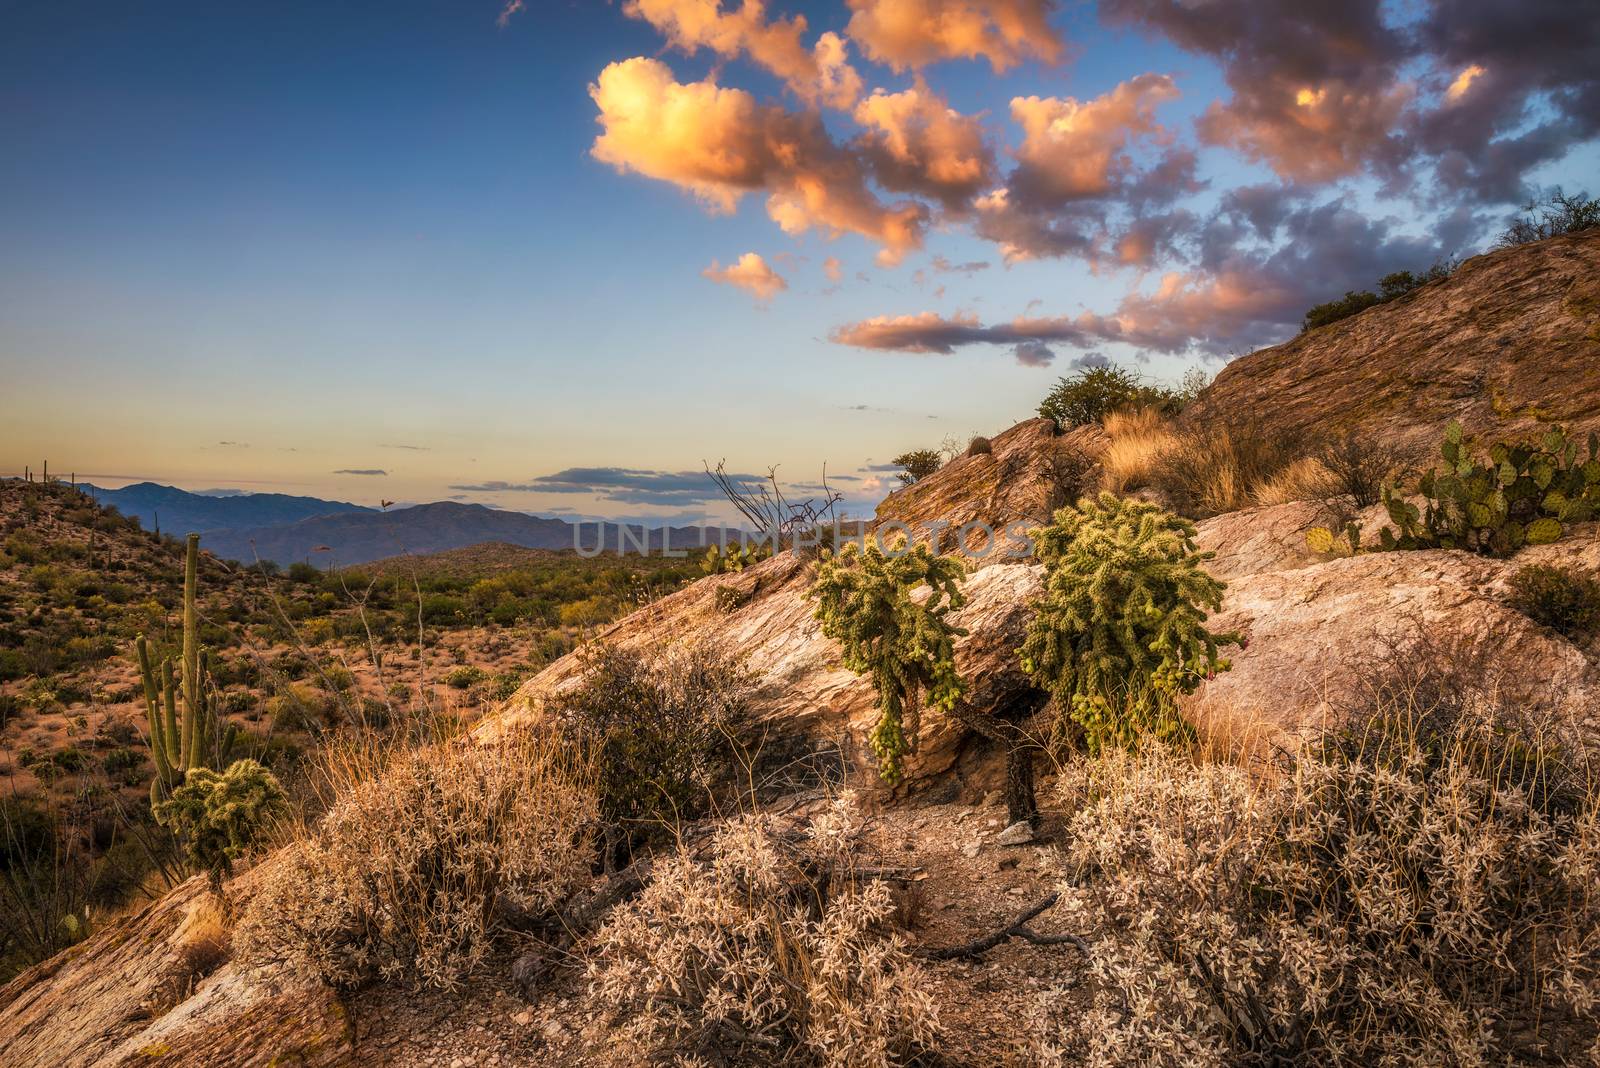 Sunset over cholla and cactuses near Javelina Rocks in Saguaro National Park by nickfox